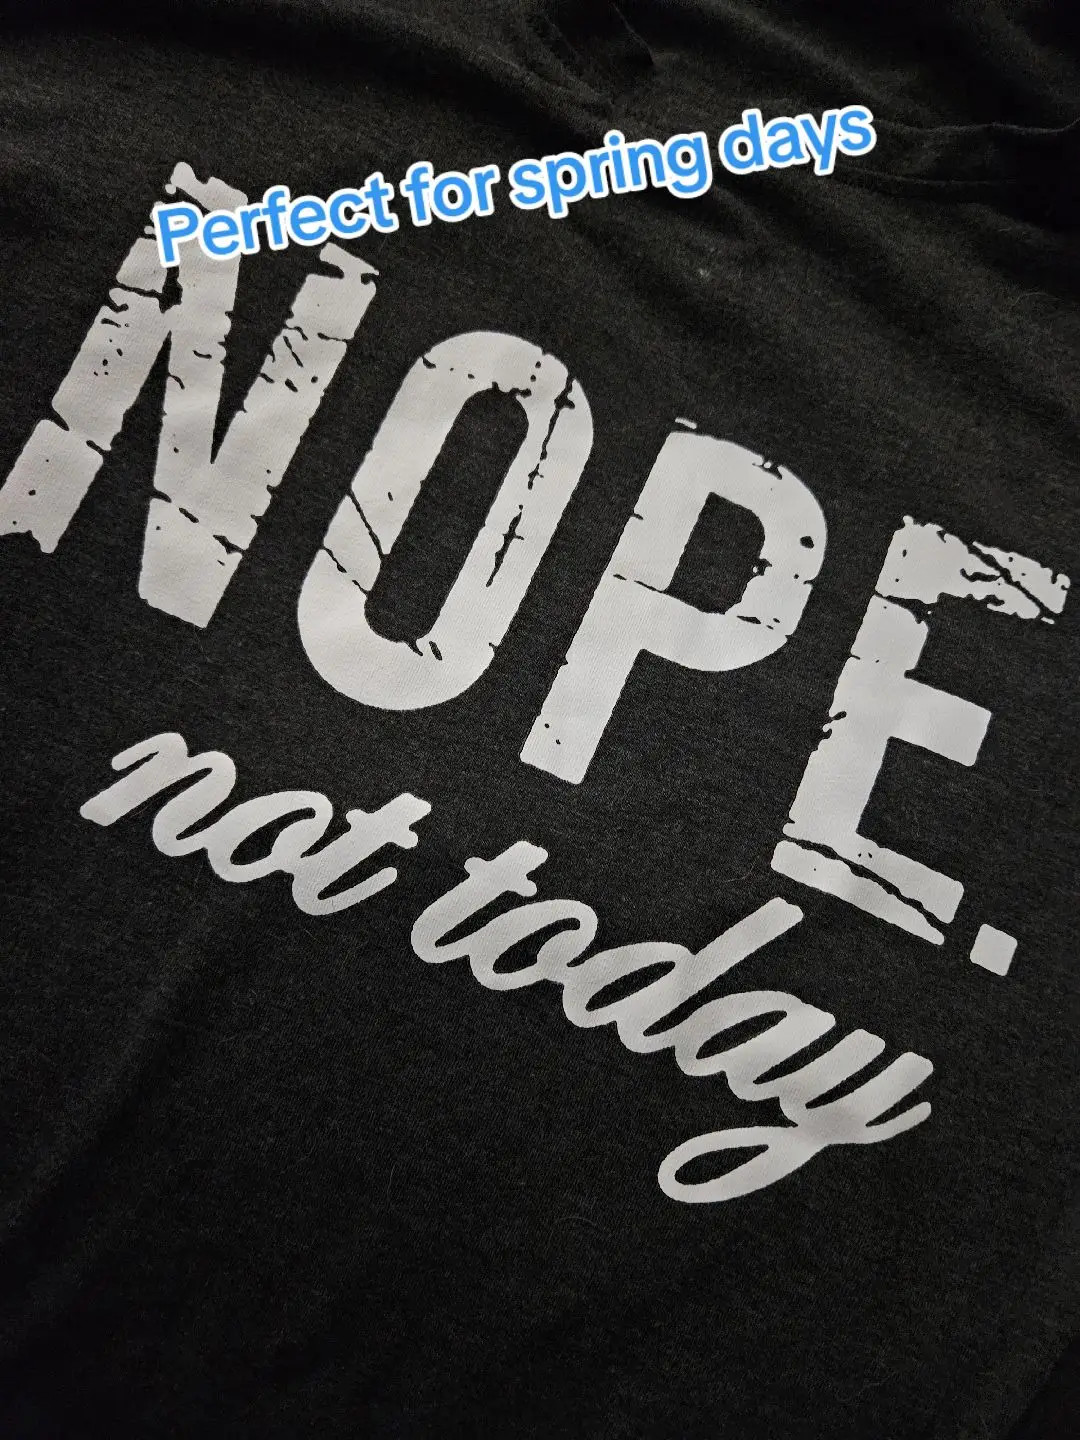 I live this shirt. Light weight fabric, great for spring days with a light jacket and some cute jeans. Also love that it says Nope not today #clothing #tshirt #nopenottoday 